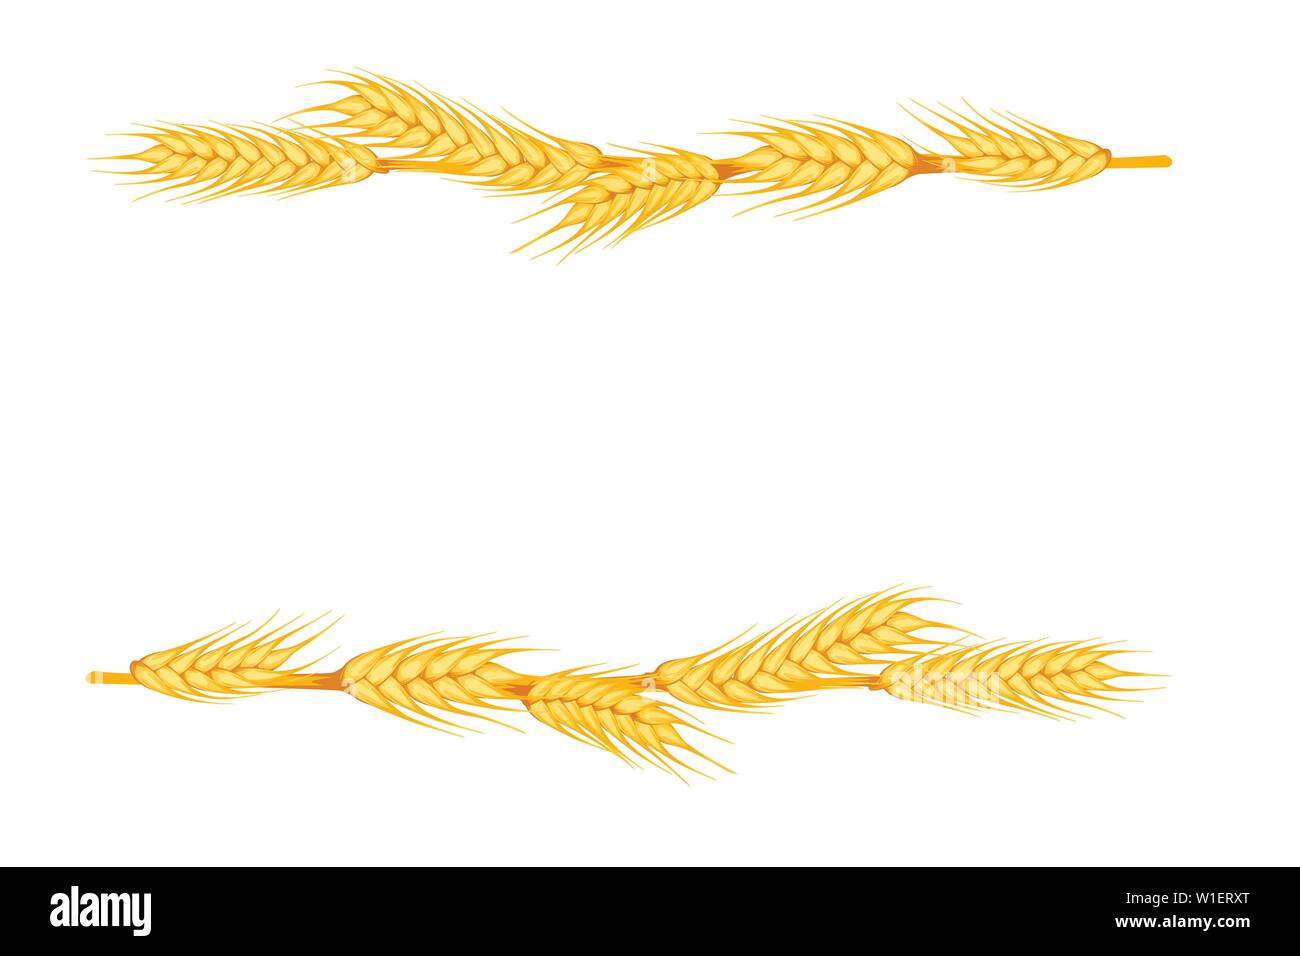 Ears of wheat lie in a row on white background flat vector illustration. Stock Vector